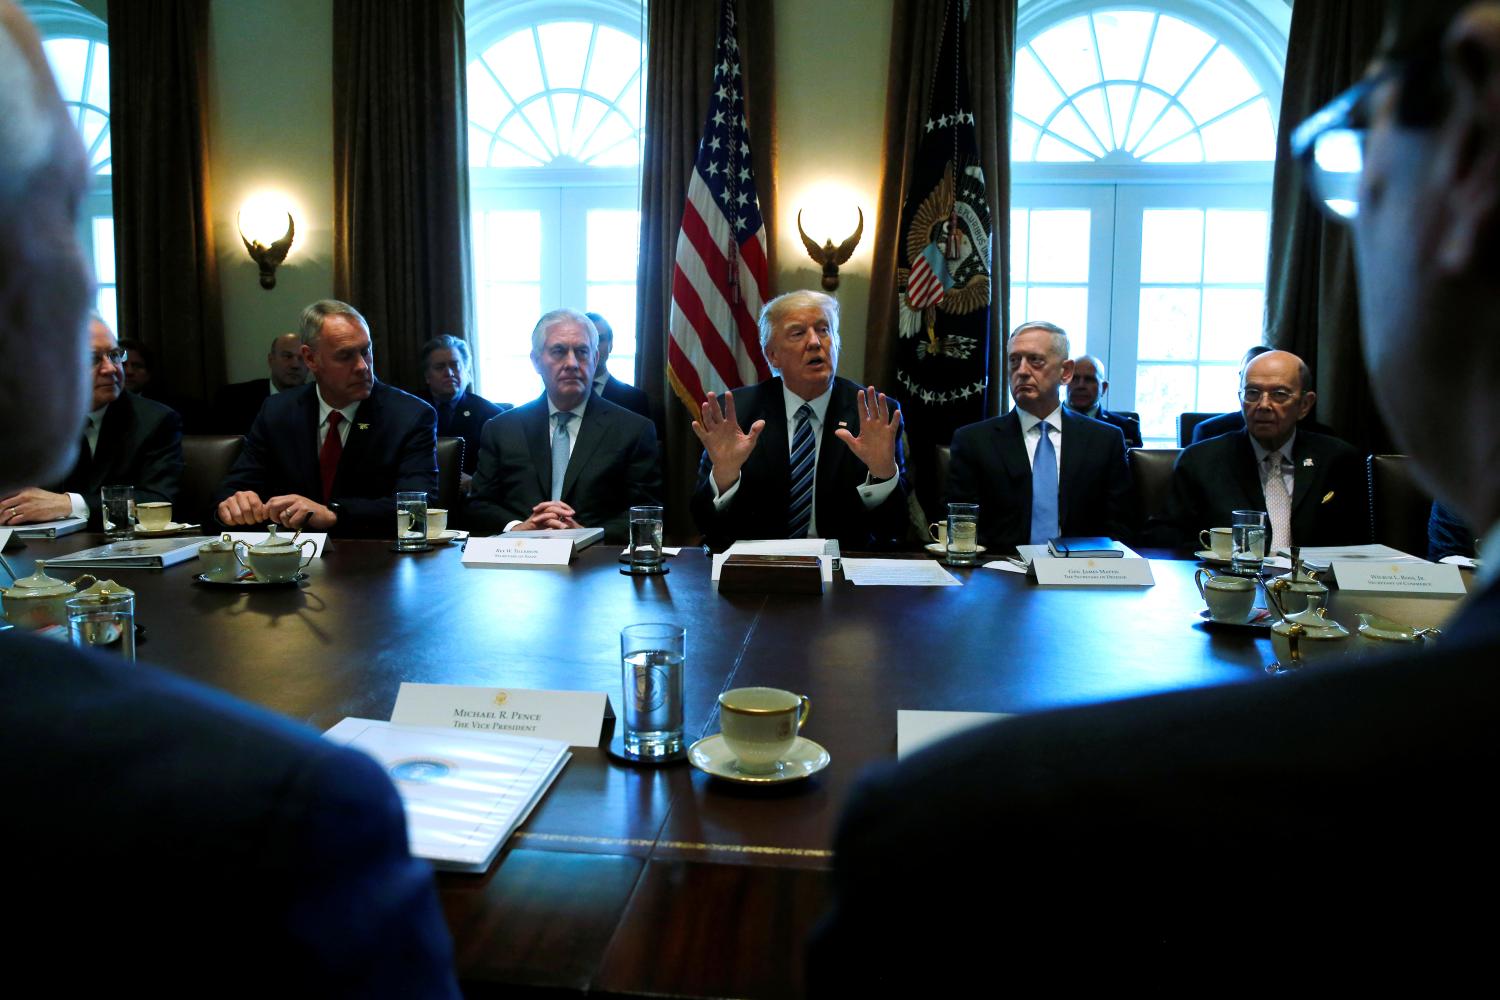 U.S. President Donald Trump (C), flanked by Interior Secretary Ryan Zinke (from L), Secretary of State Rex Tillerson, Defense Secretary James Mattis and Commerce Secretary Wilbur Ross, holds a cabinet meeting at the White House in Washington, U.S. March 13, 2017. REUTERS/Jonathan Ernst - RTX30UWZ